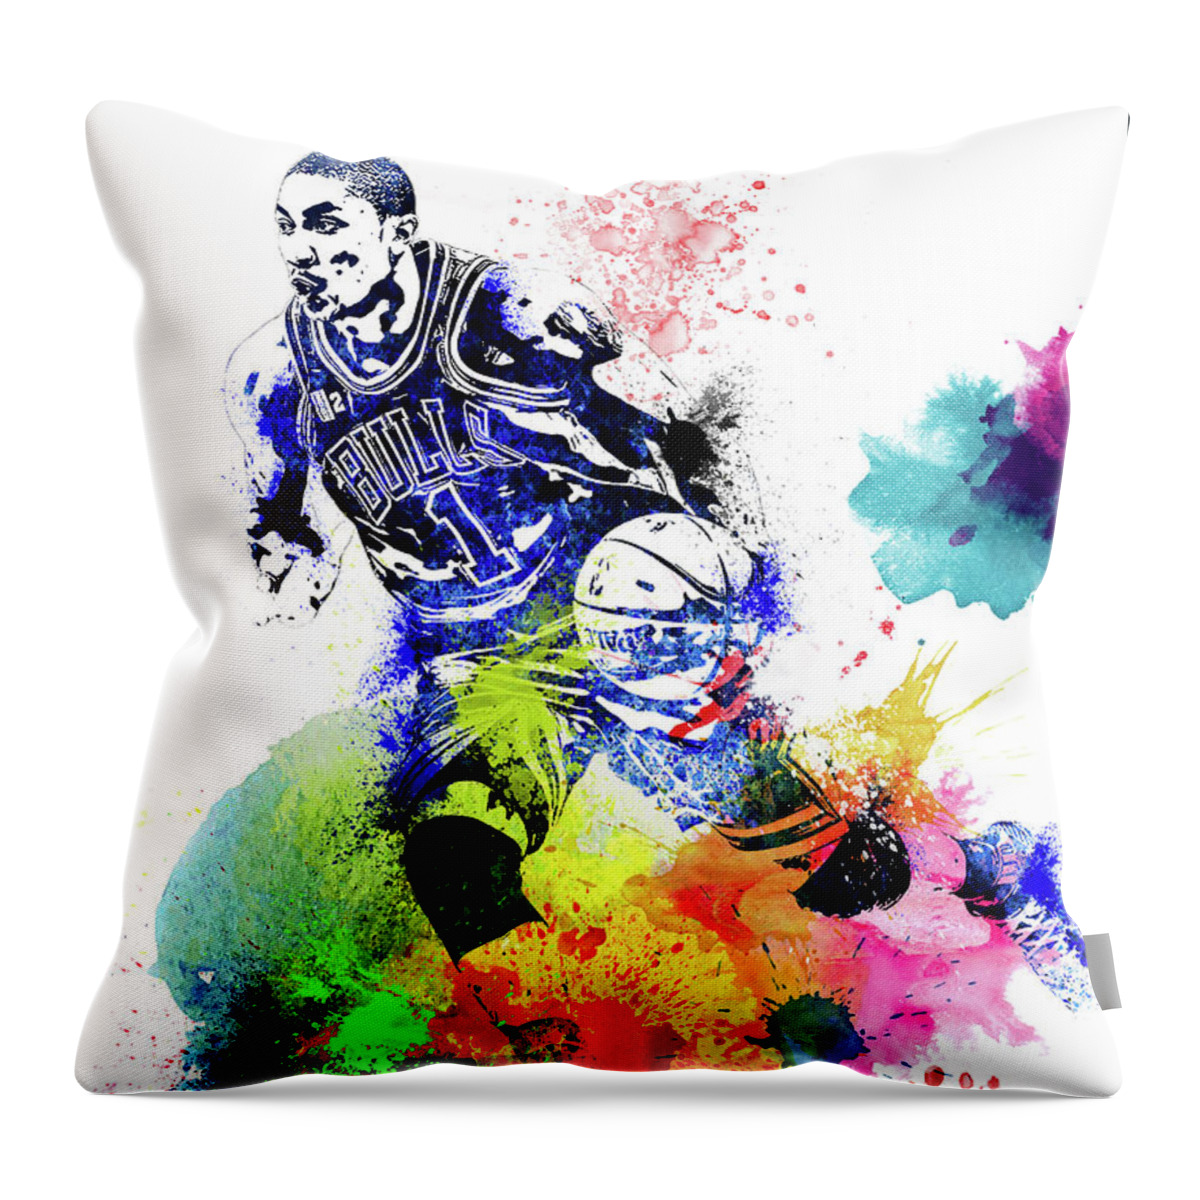 Derrick Rose Throw Pillow featuring the mixed media Derrick Rose Watercolor I by Naxart Studio